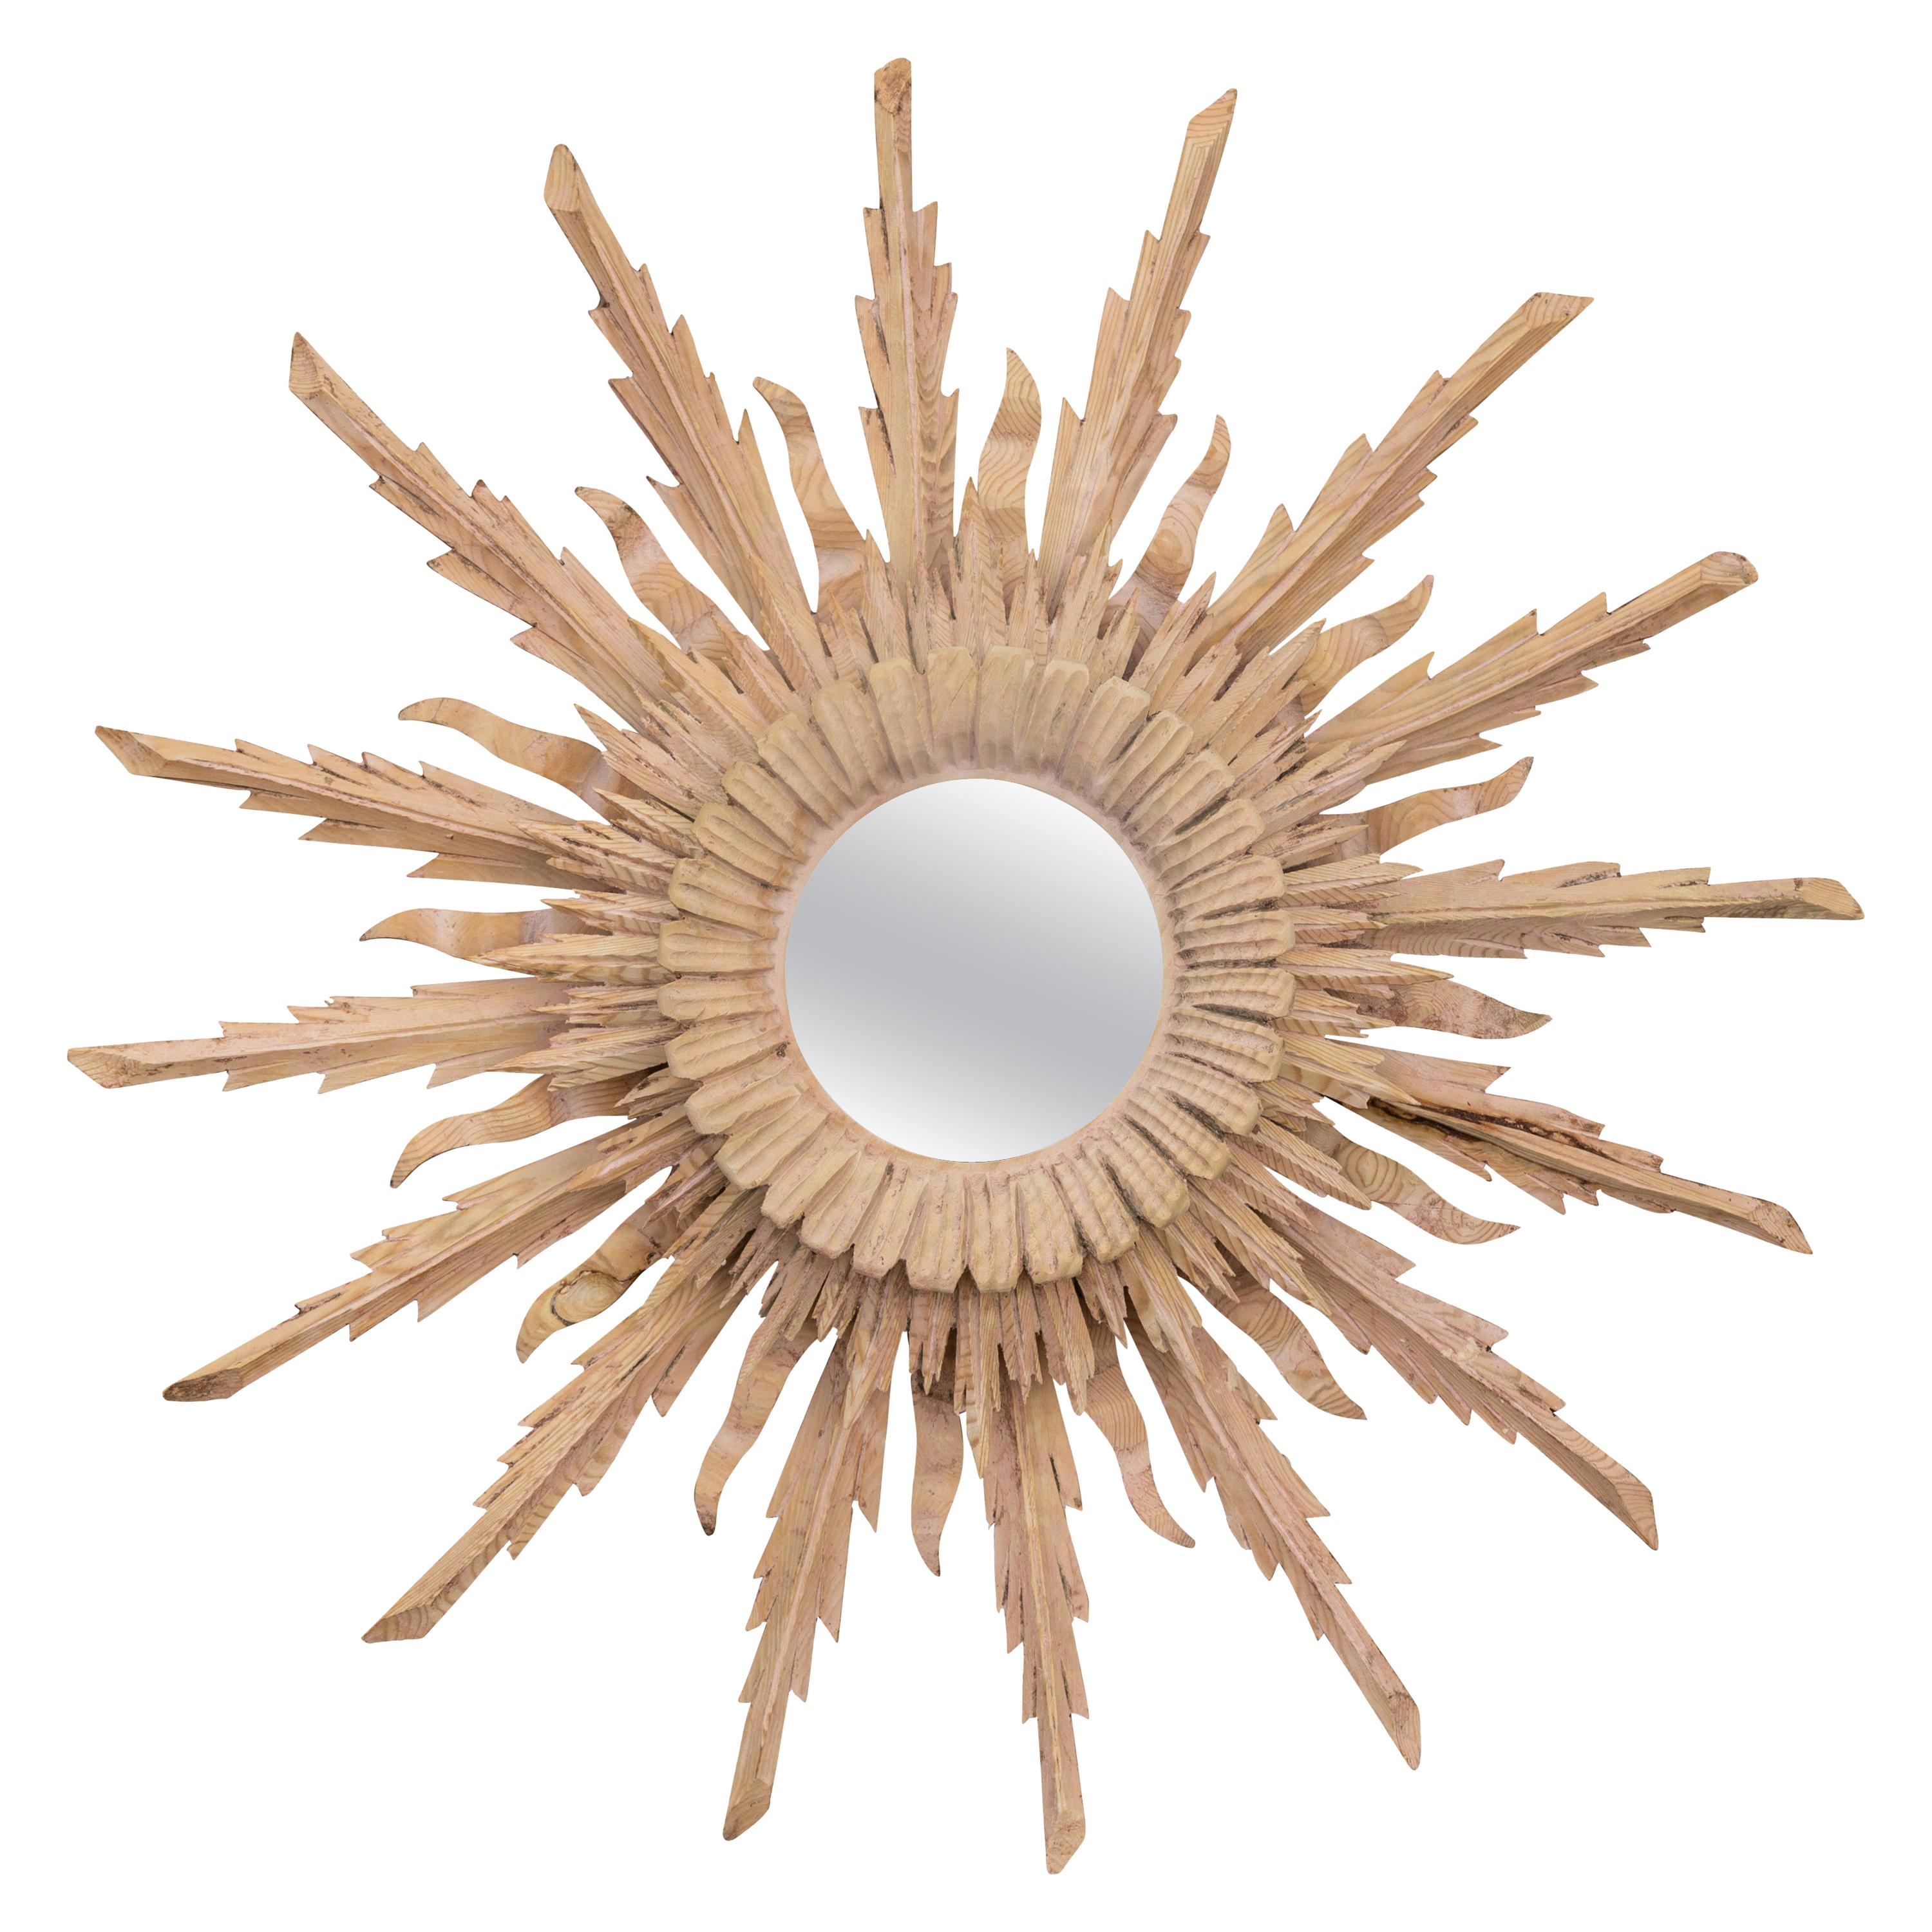 Vintage French Bleached Wood Midcentury Sunburst Mirror with Radiating Rays